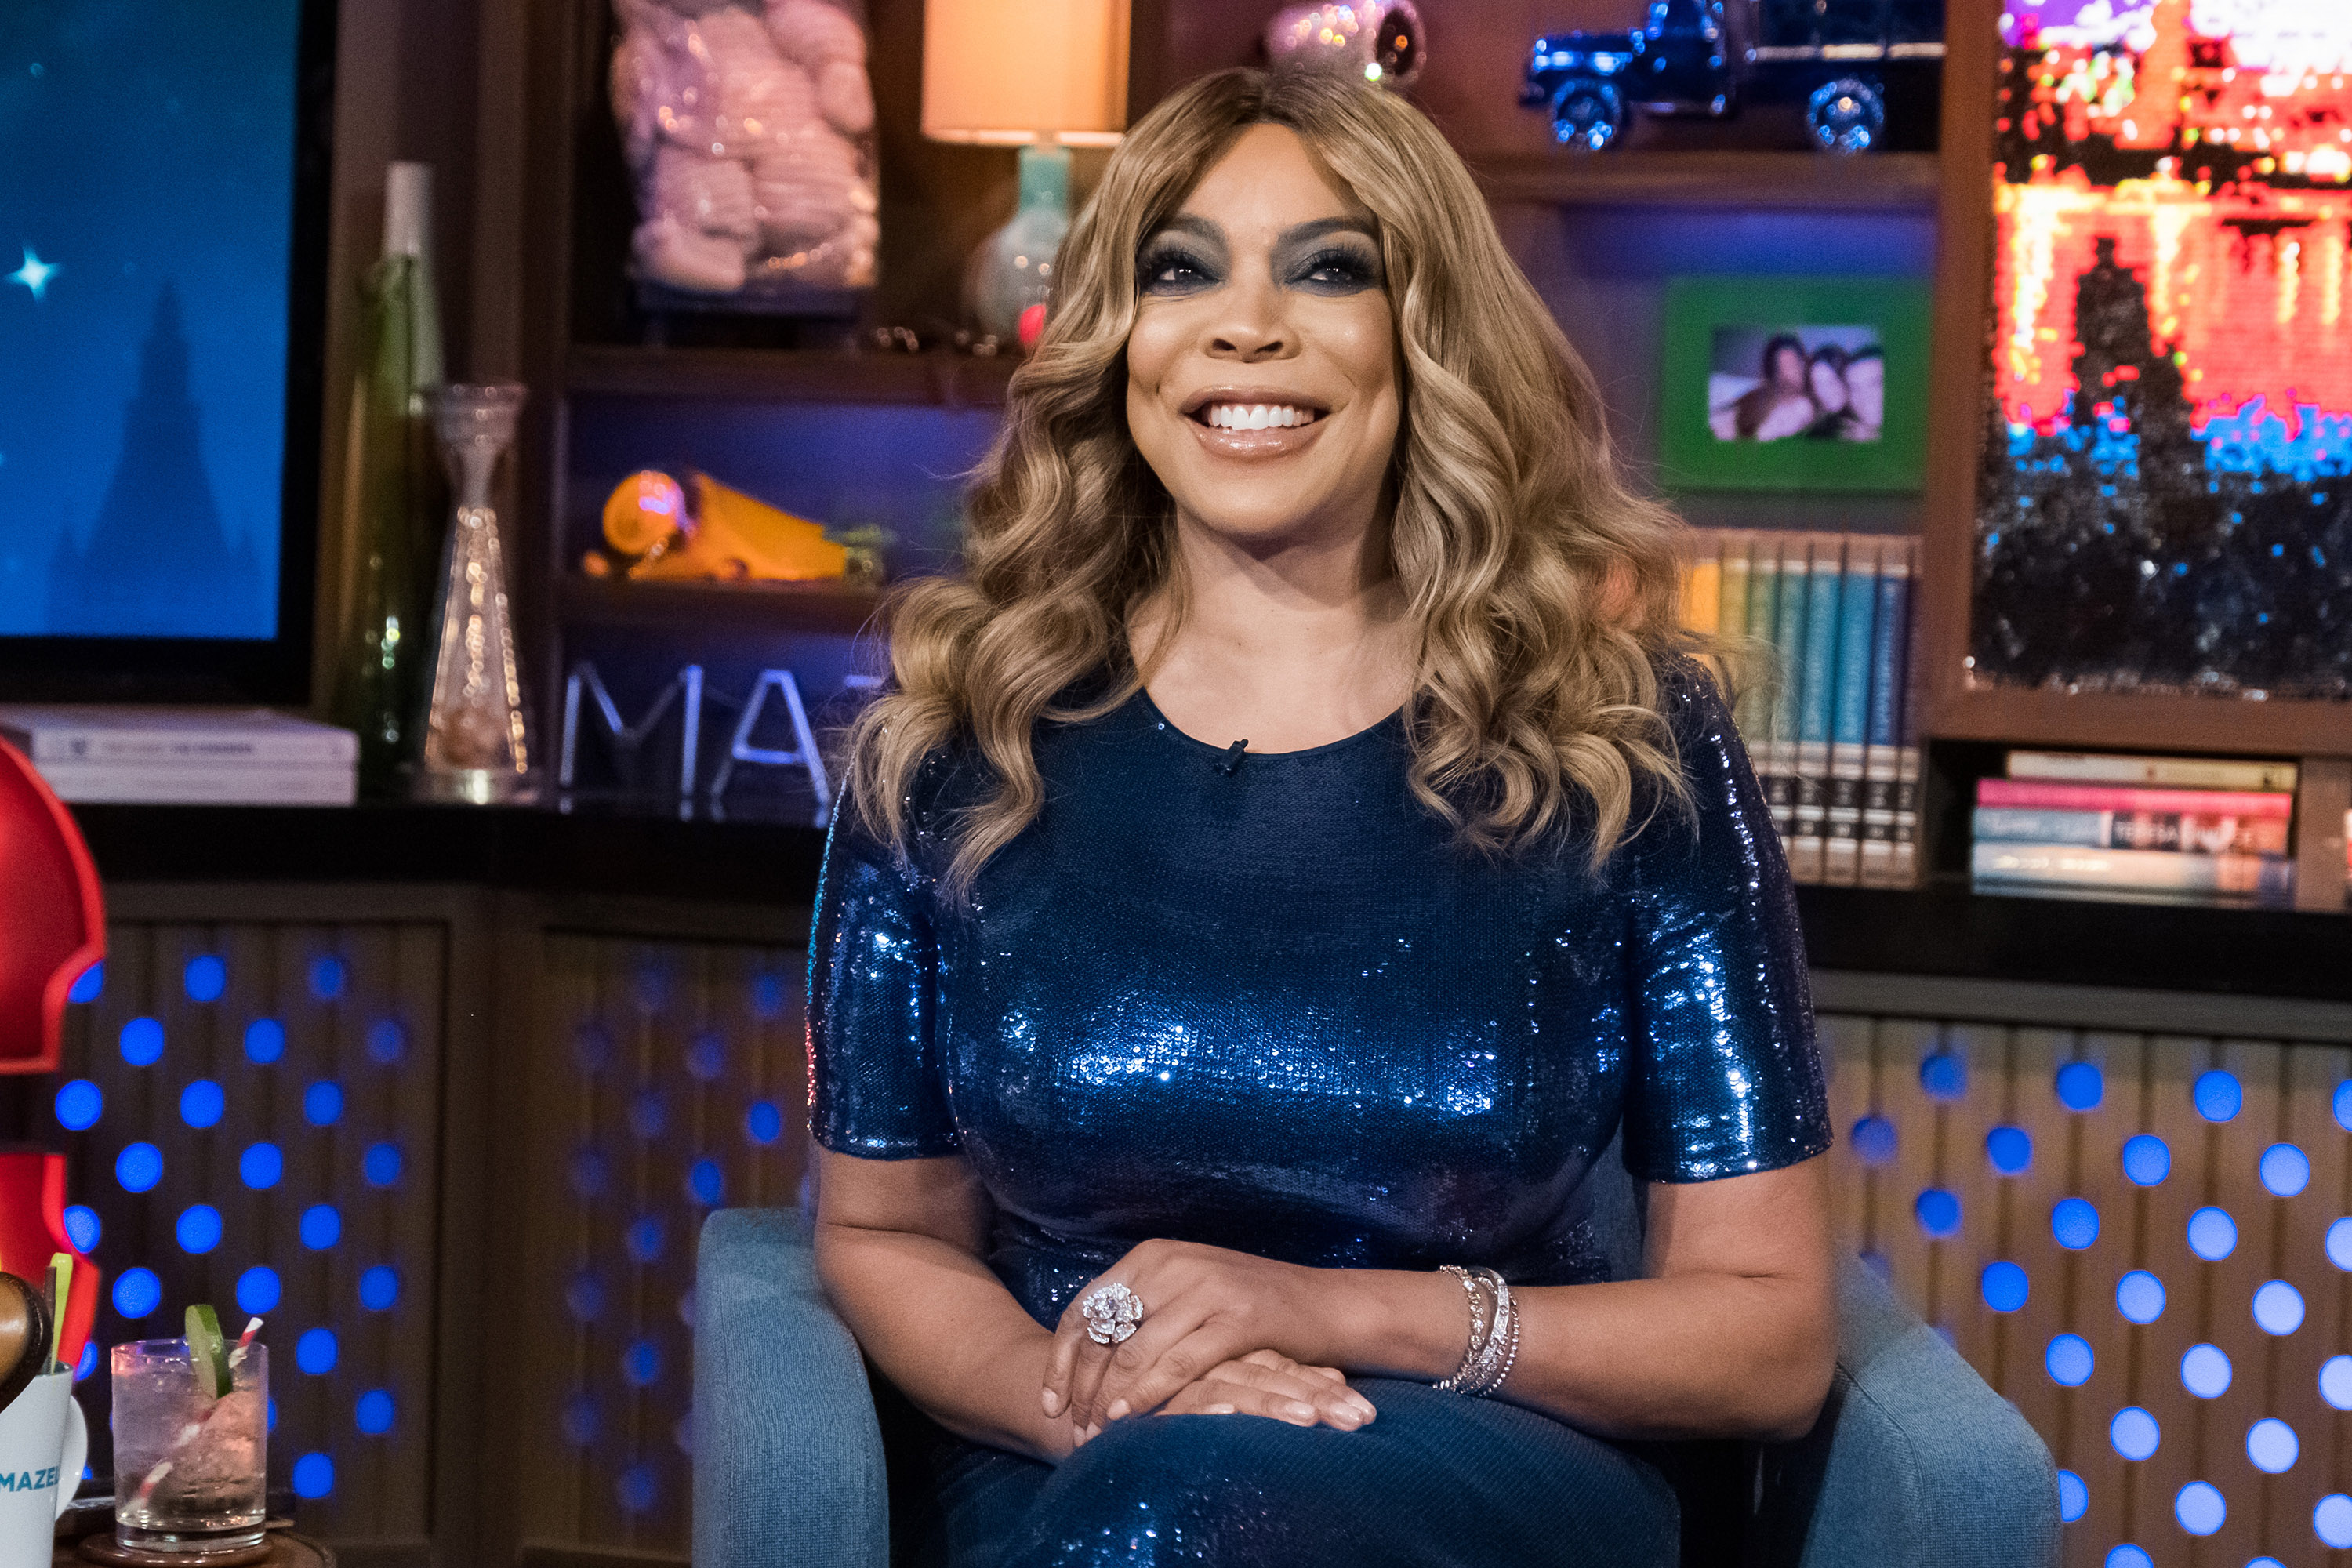 Wendy Williams on "Watch What Happens Live With Andy Cohen" on September 8, 2019. | Source: Getty Images